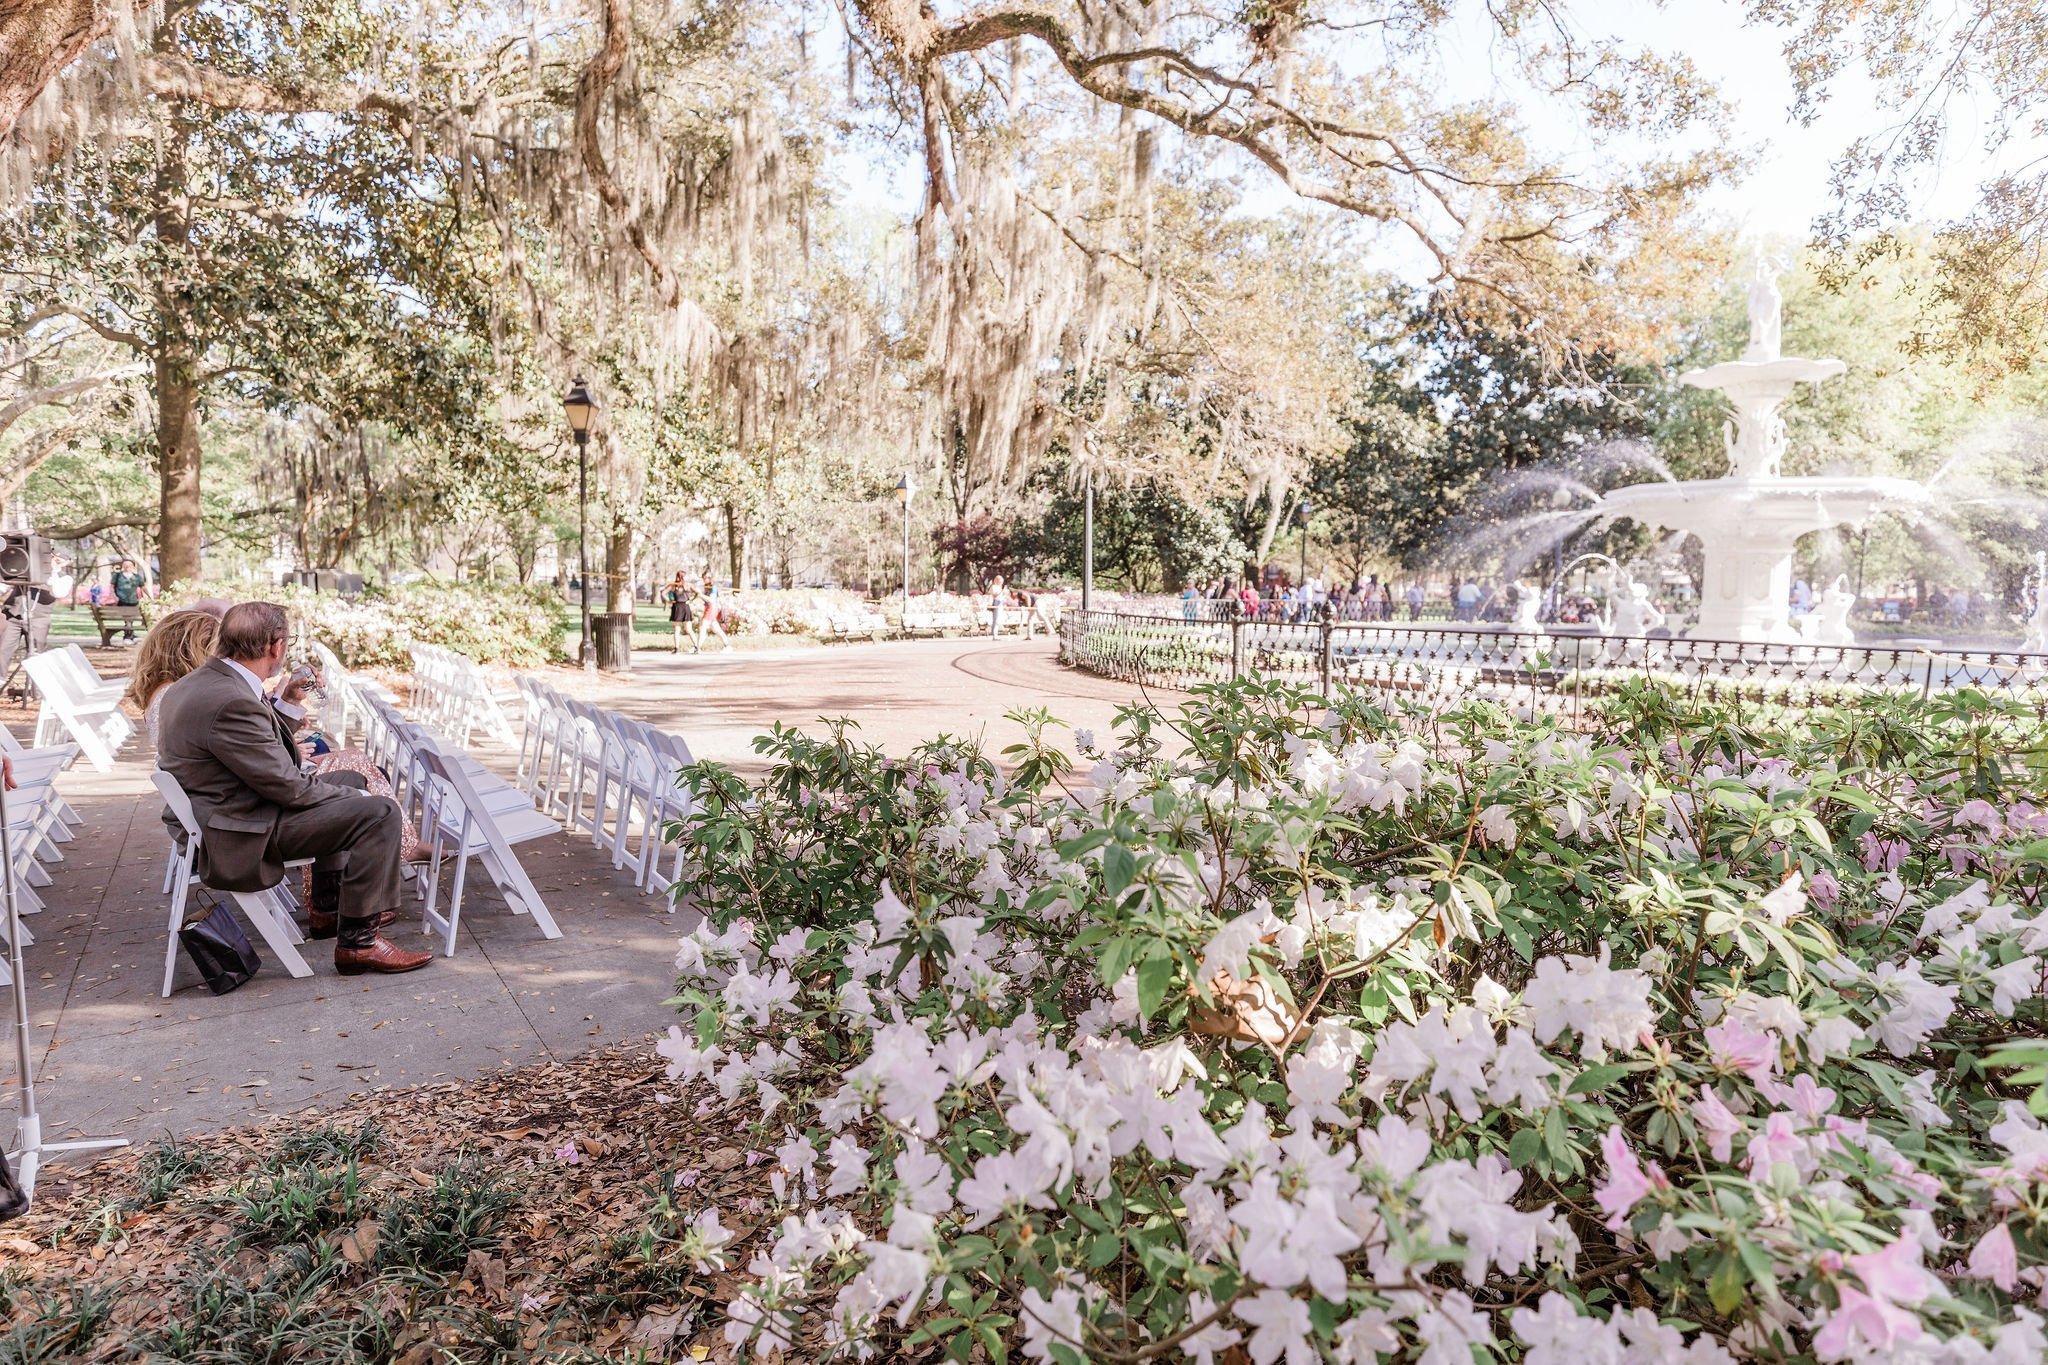 Victoria-and-stuarts-pastel-spring-wedding-at-the-forsyth-park-fountain-and-the-mansion-on-forsyth-in-savannah-georgia-planned-by-savannah-wedding-planner-and-savannah-wedding-florist-ivory-and-beau-10.JPG